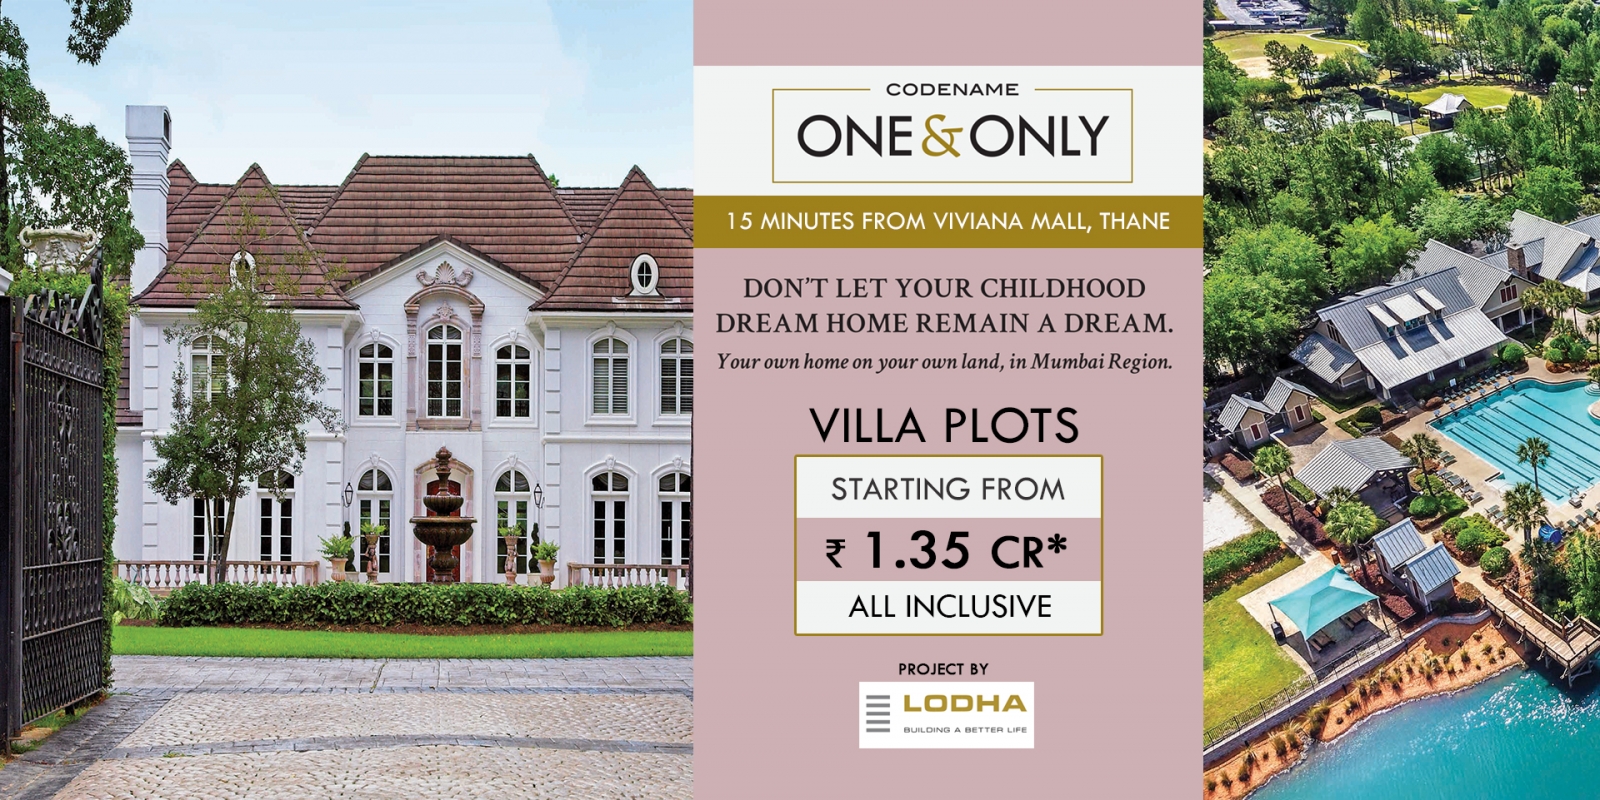 Codename one and only -lodha villa.jpg